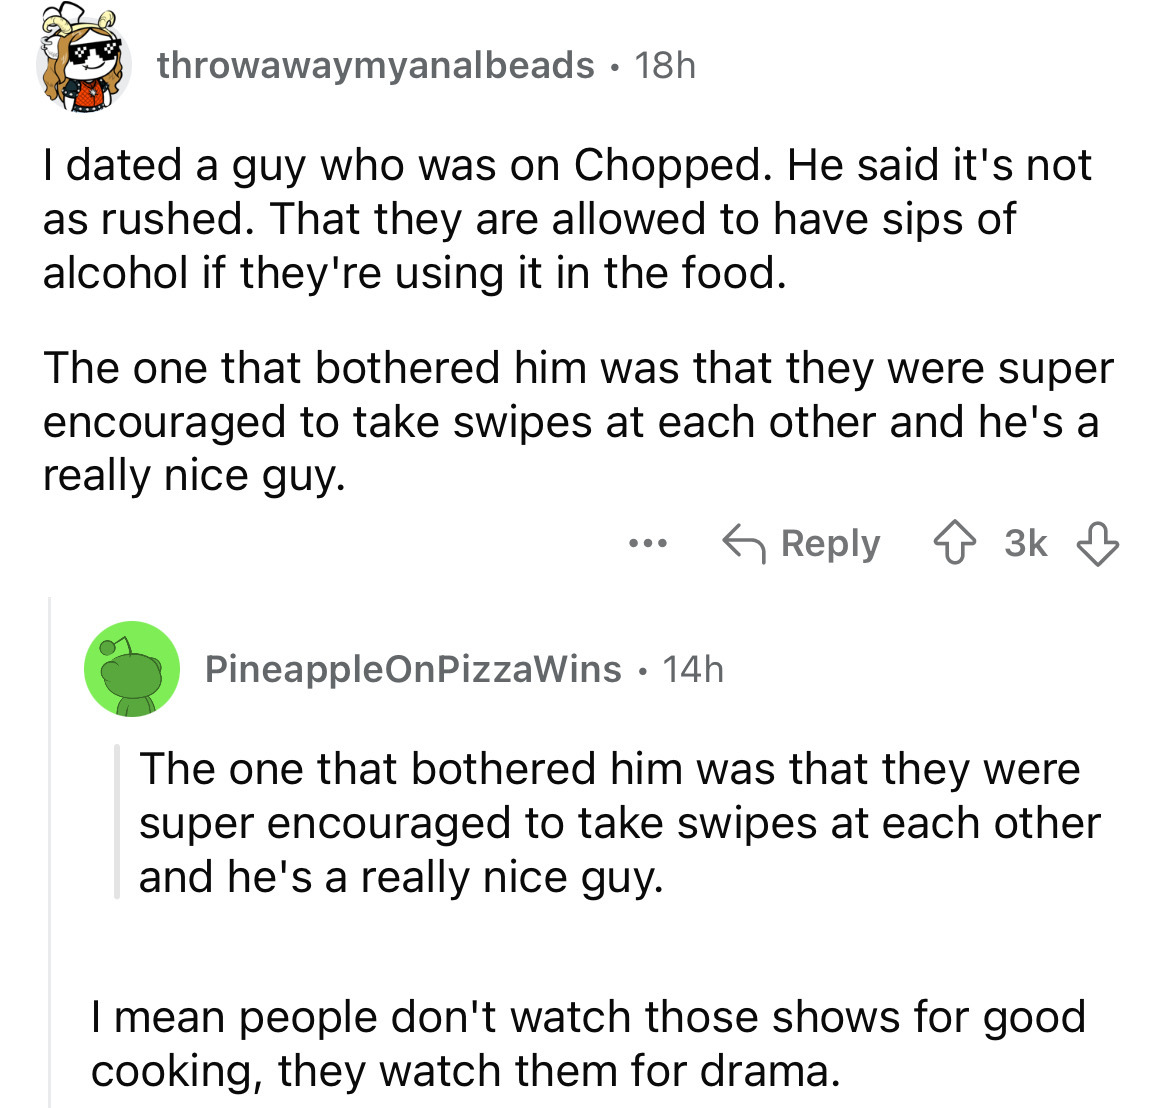 screenshot - throwawaymyanalbeads 18h I dated a guy who was on Chopped. He said it's not as rushed. That they are allowed to have sips of alcohol if they're using it in the food. The one that bothered him was that they were super encouraged to take swipes